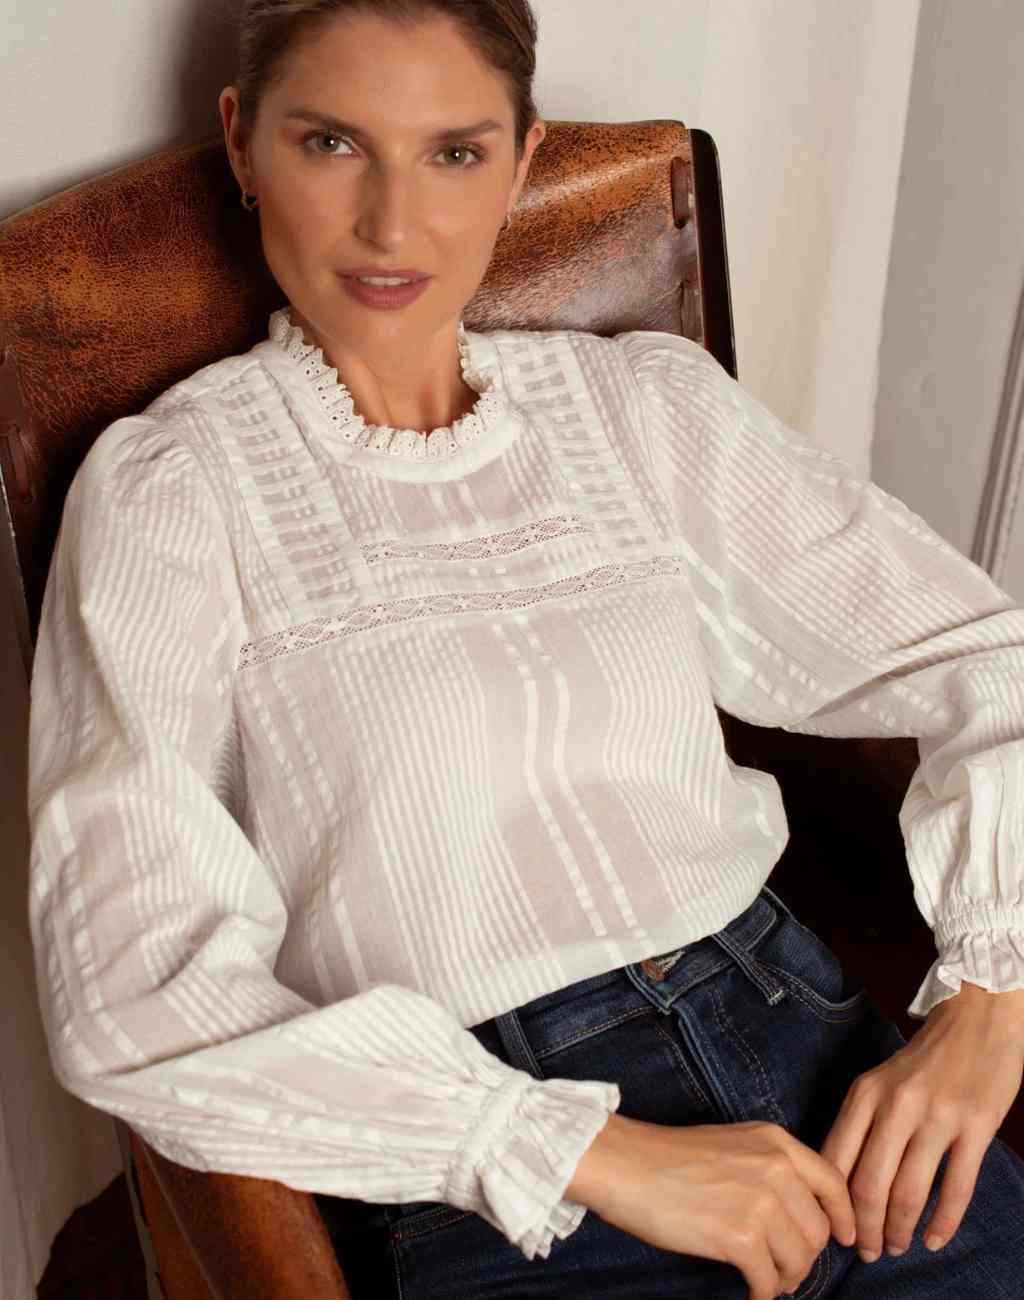 White Ruby Blouse with Pintucks at Neck and Hem | Seersucker and Lace Details - Visit Nifty Ophelia & Indigo 